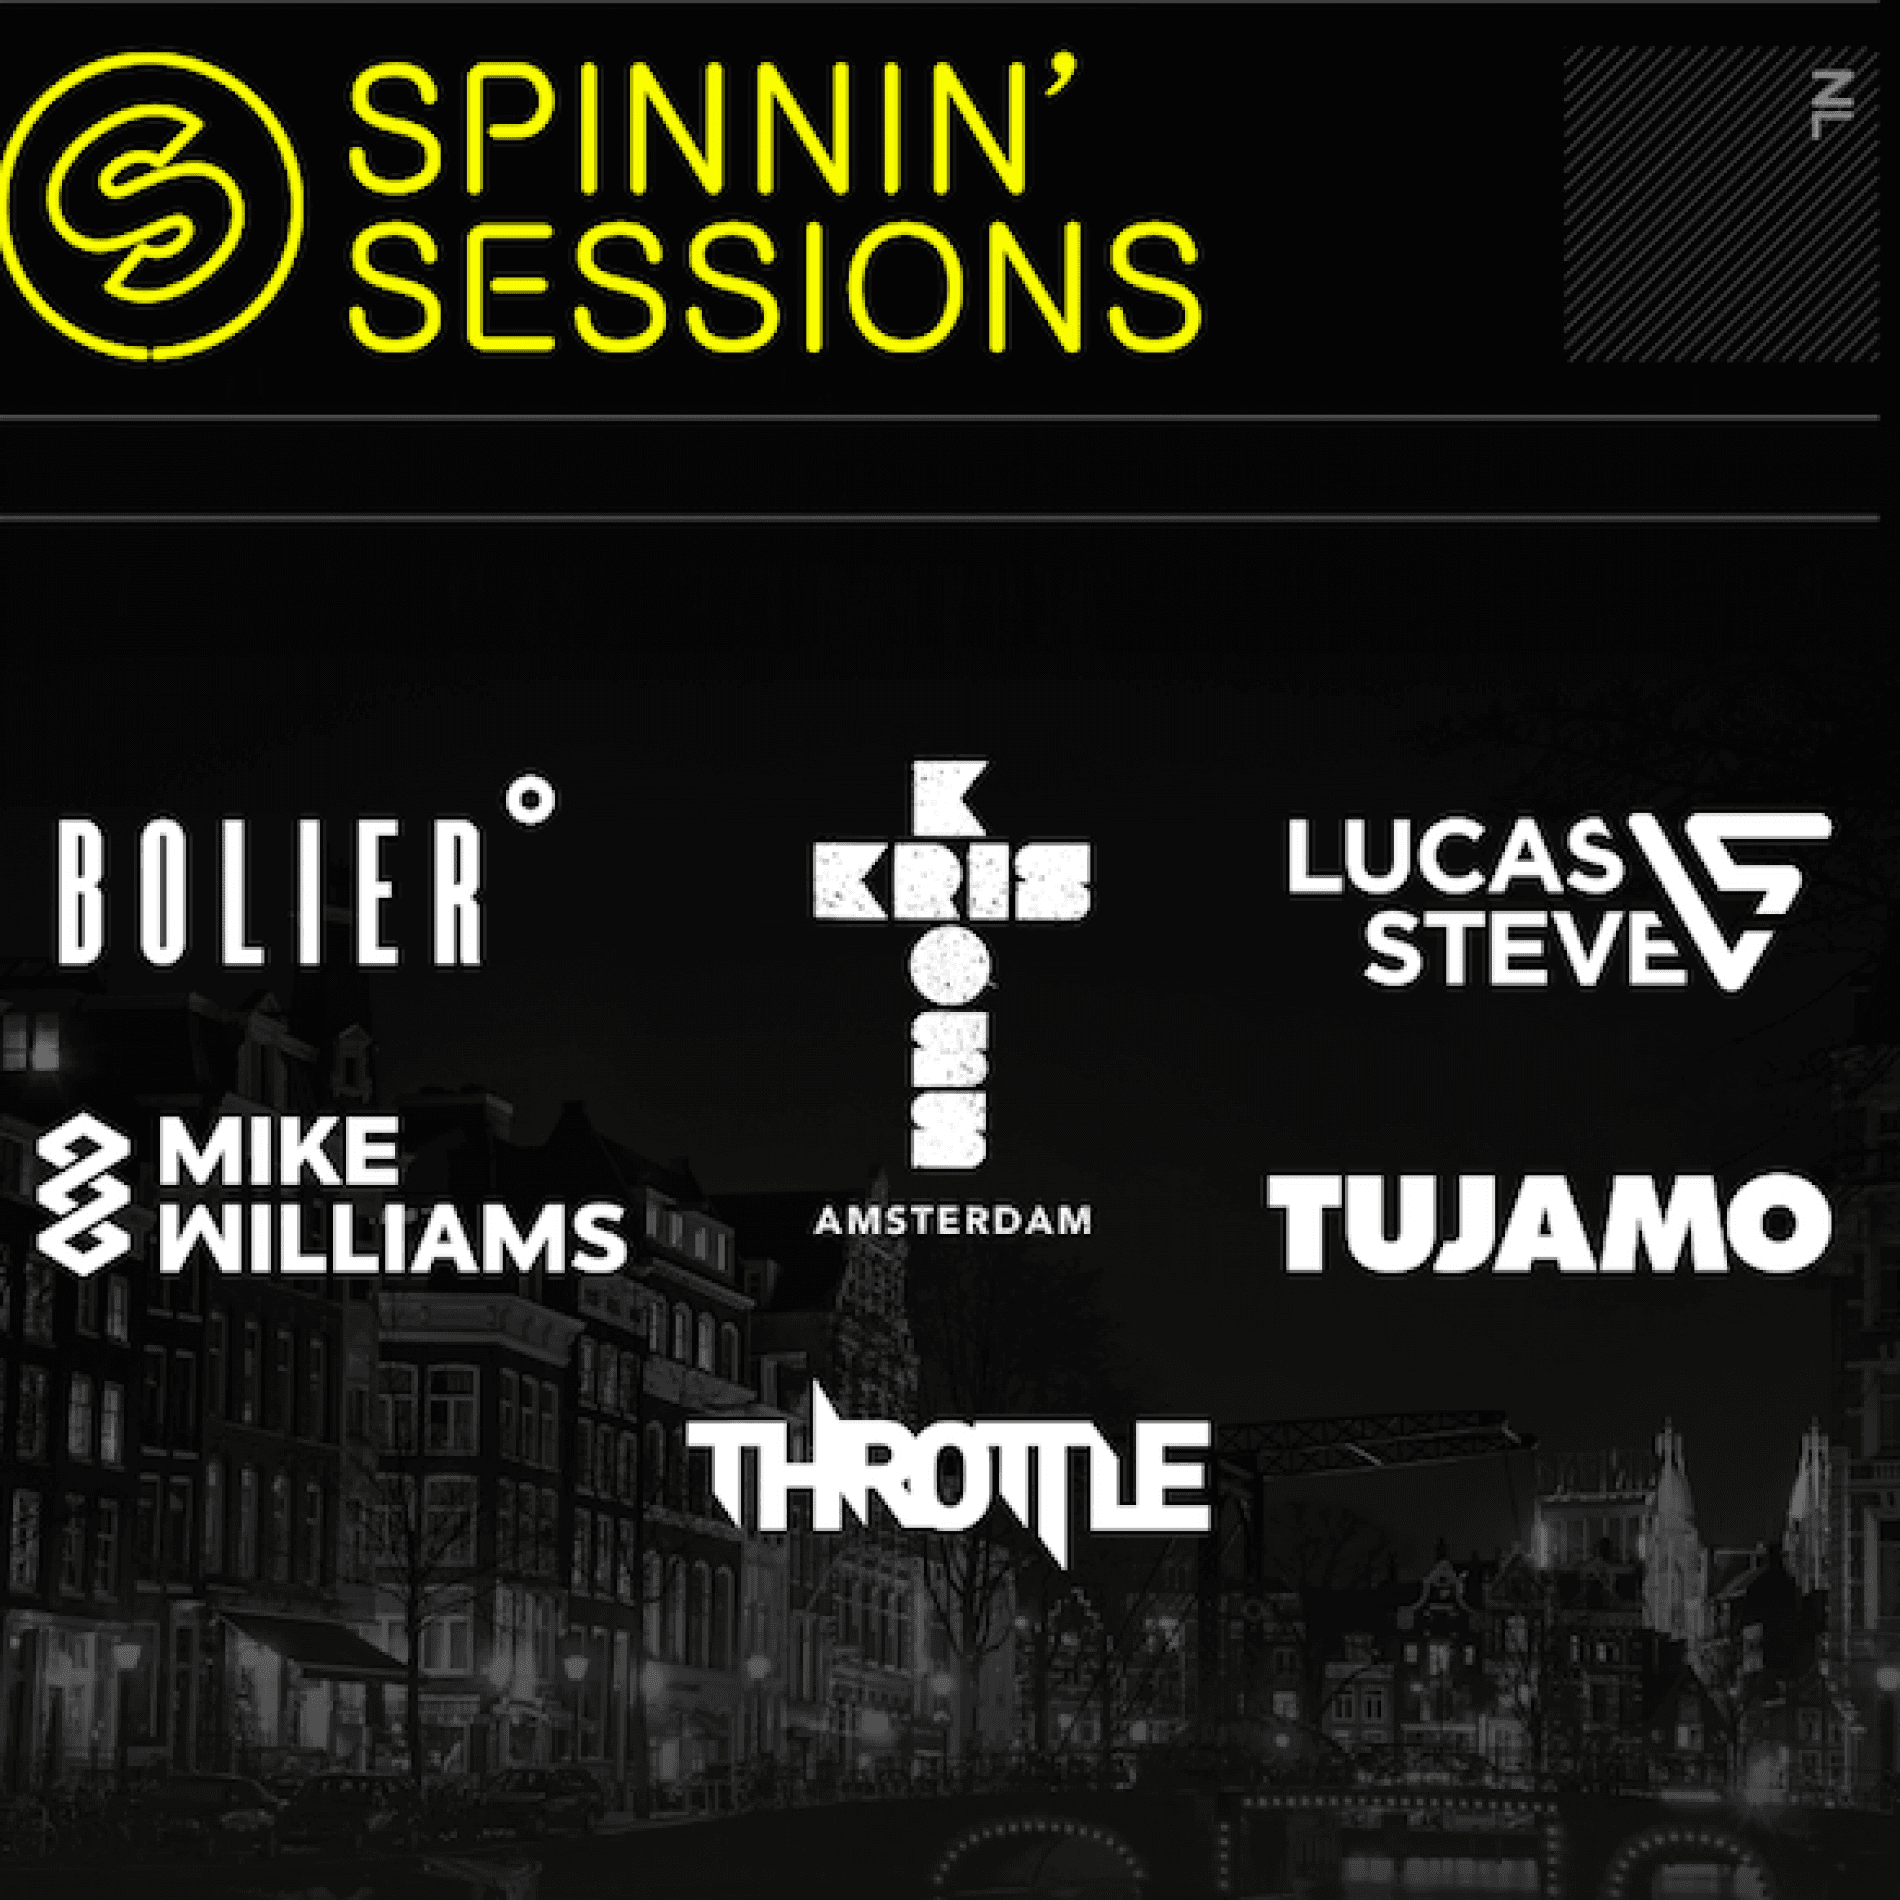 Spinnin' Sessions announces first names for ADE party